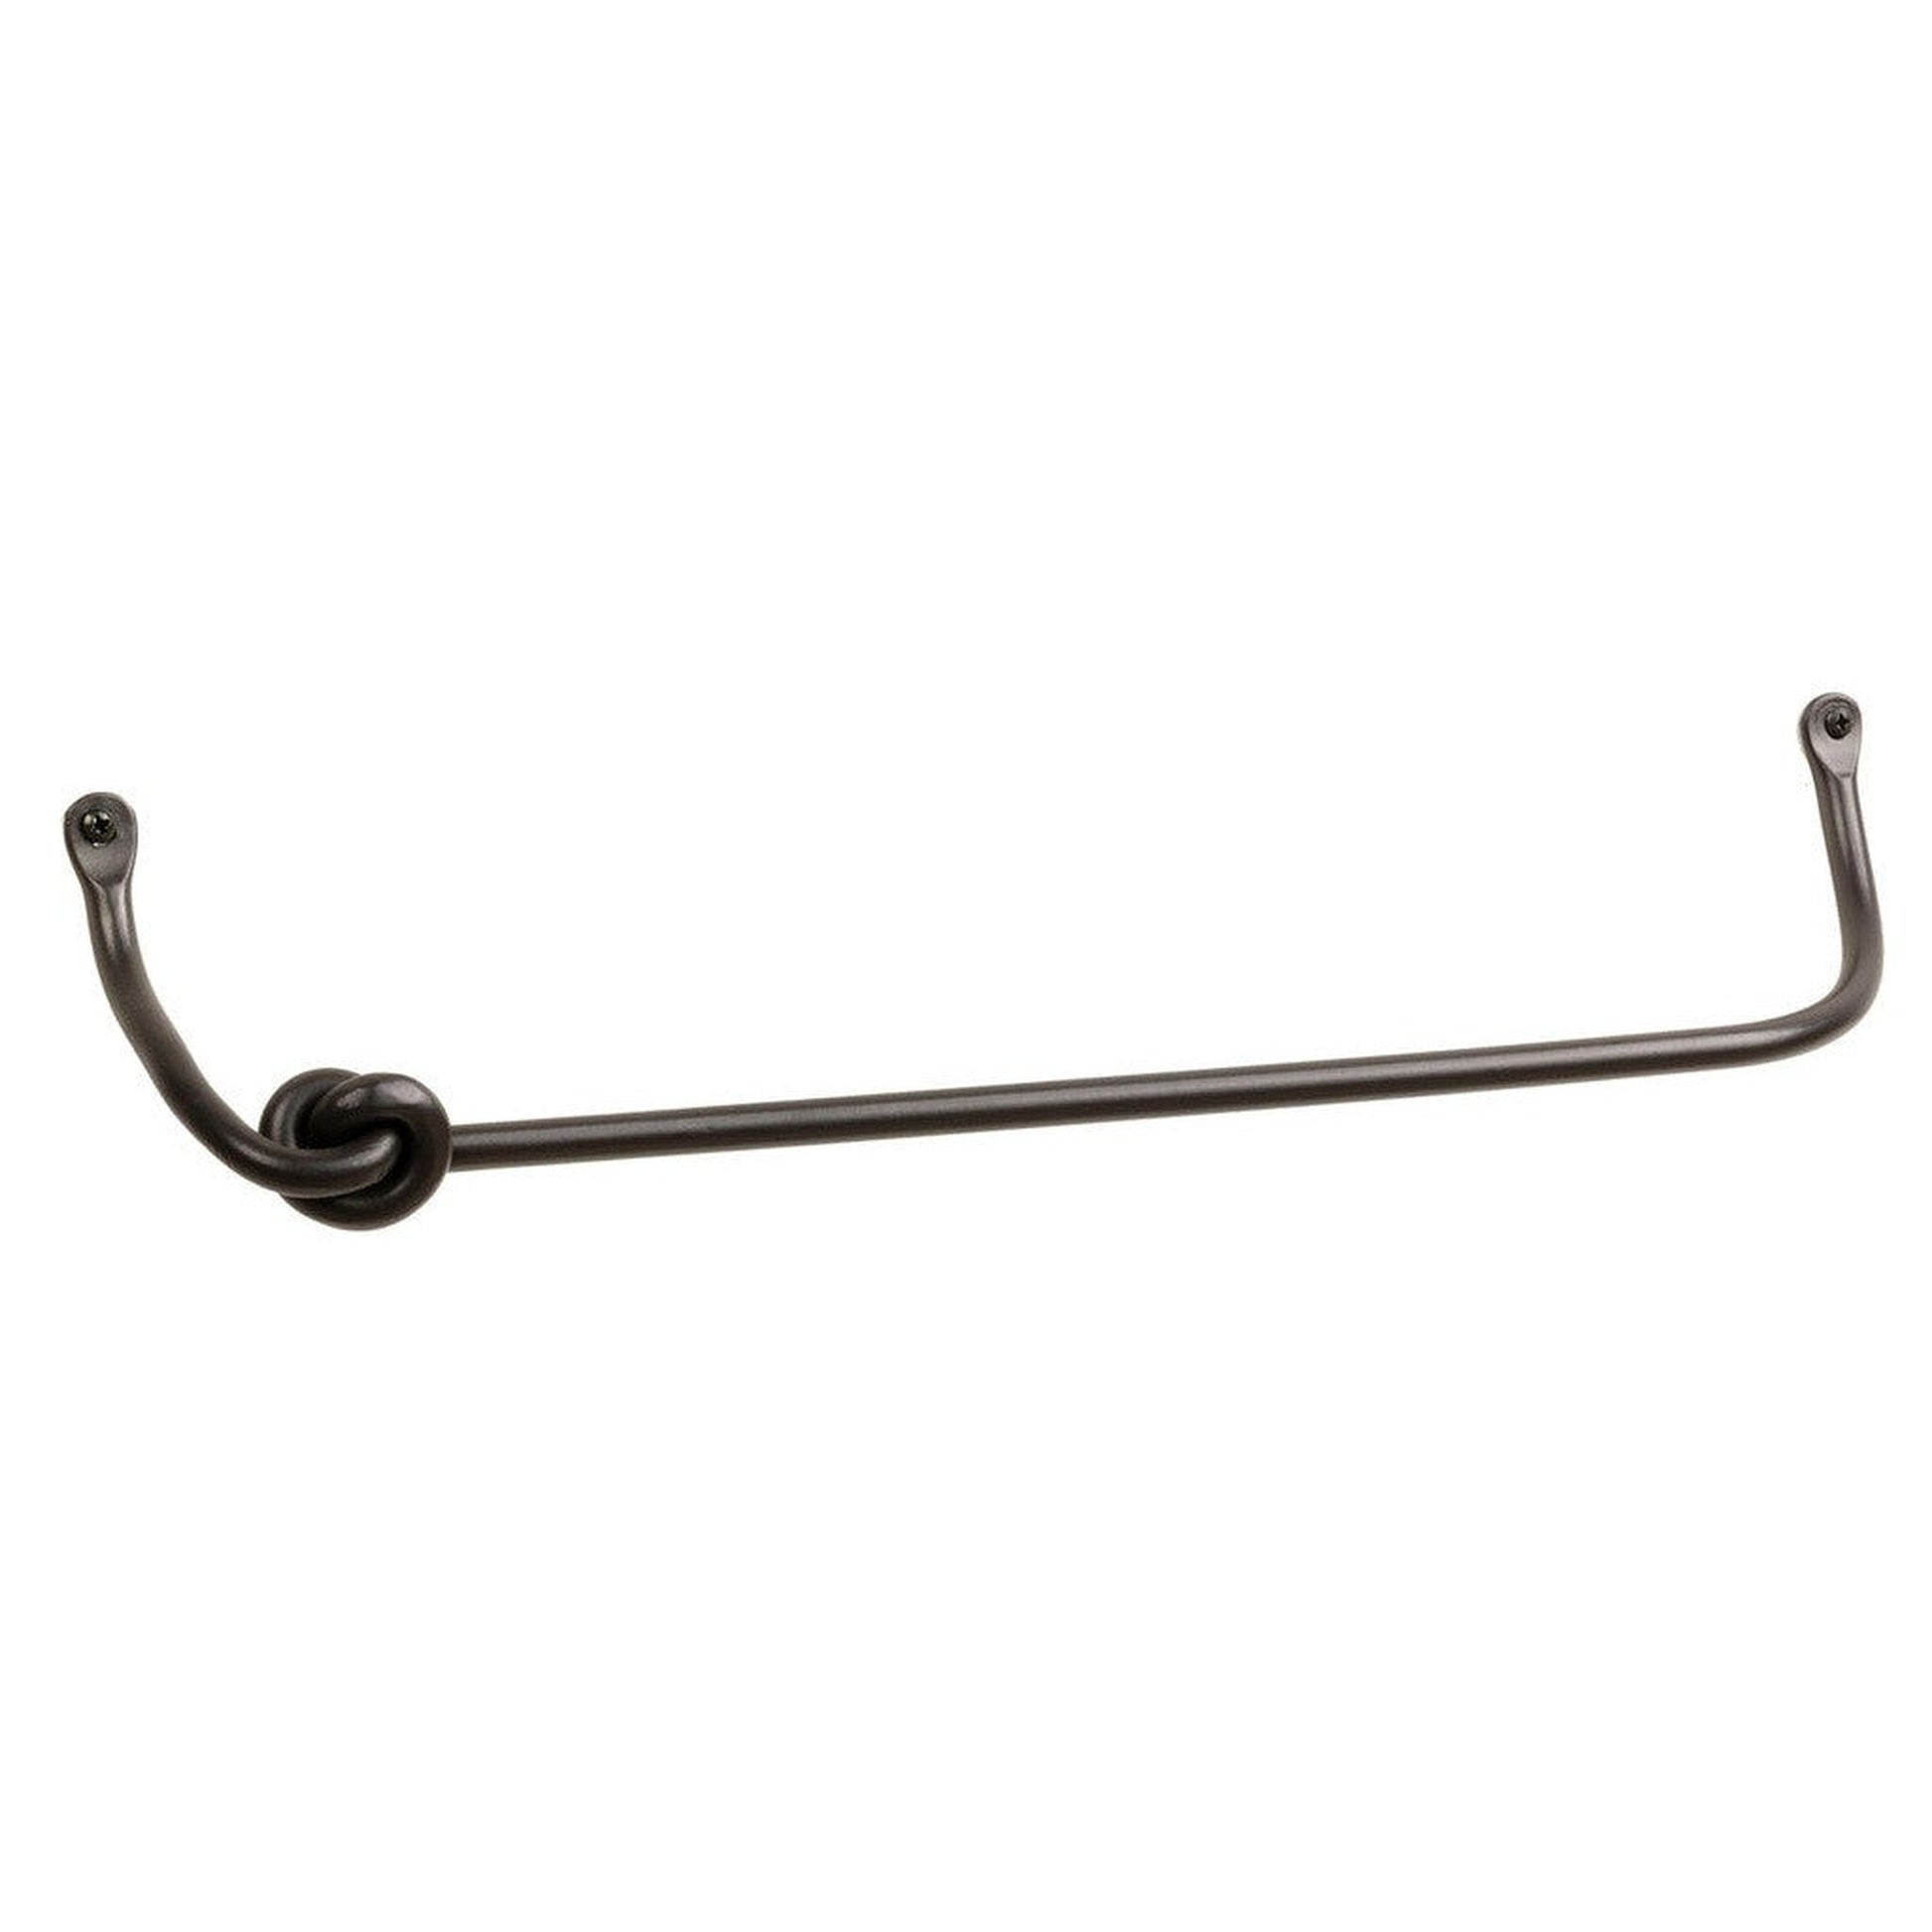 Stone County Ironworks Knot 16" Burnished Gold Iron Towel Bar With Copper Iron Accent